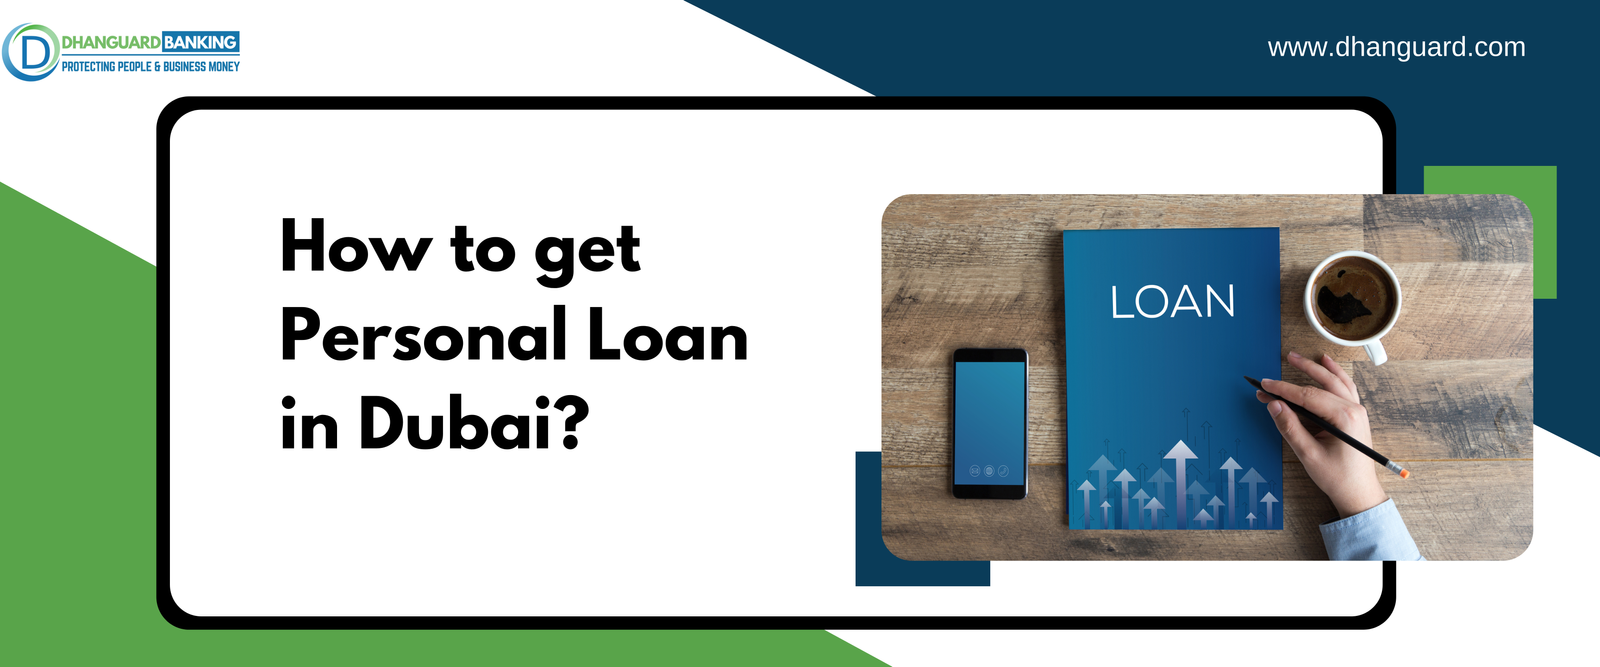 How to get Personal Loan in Dubai